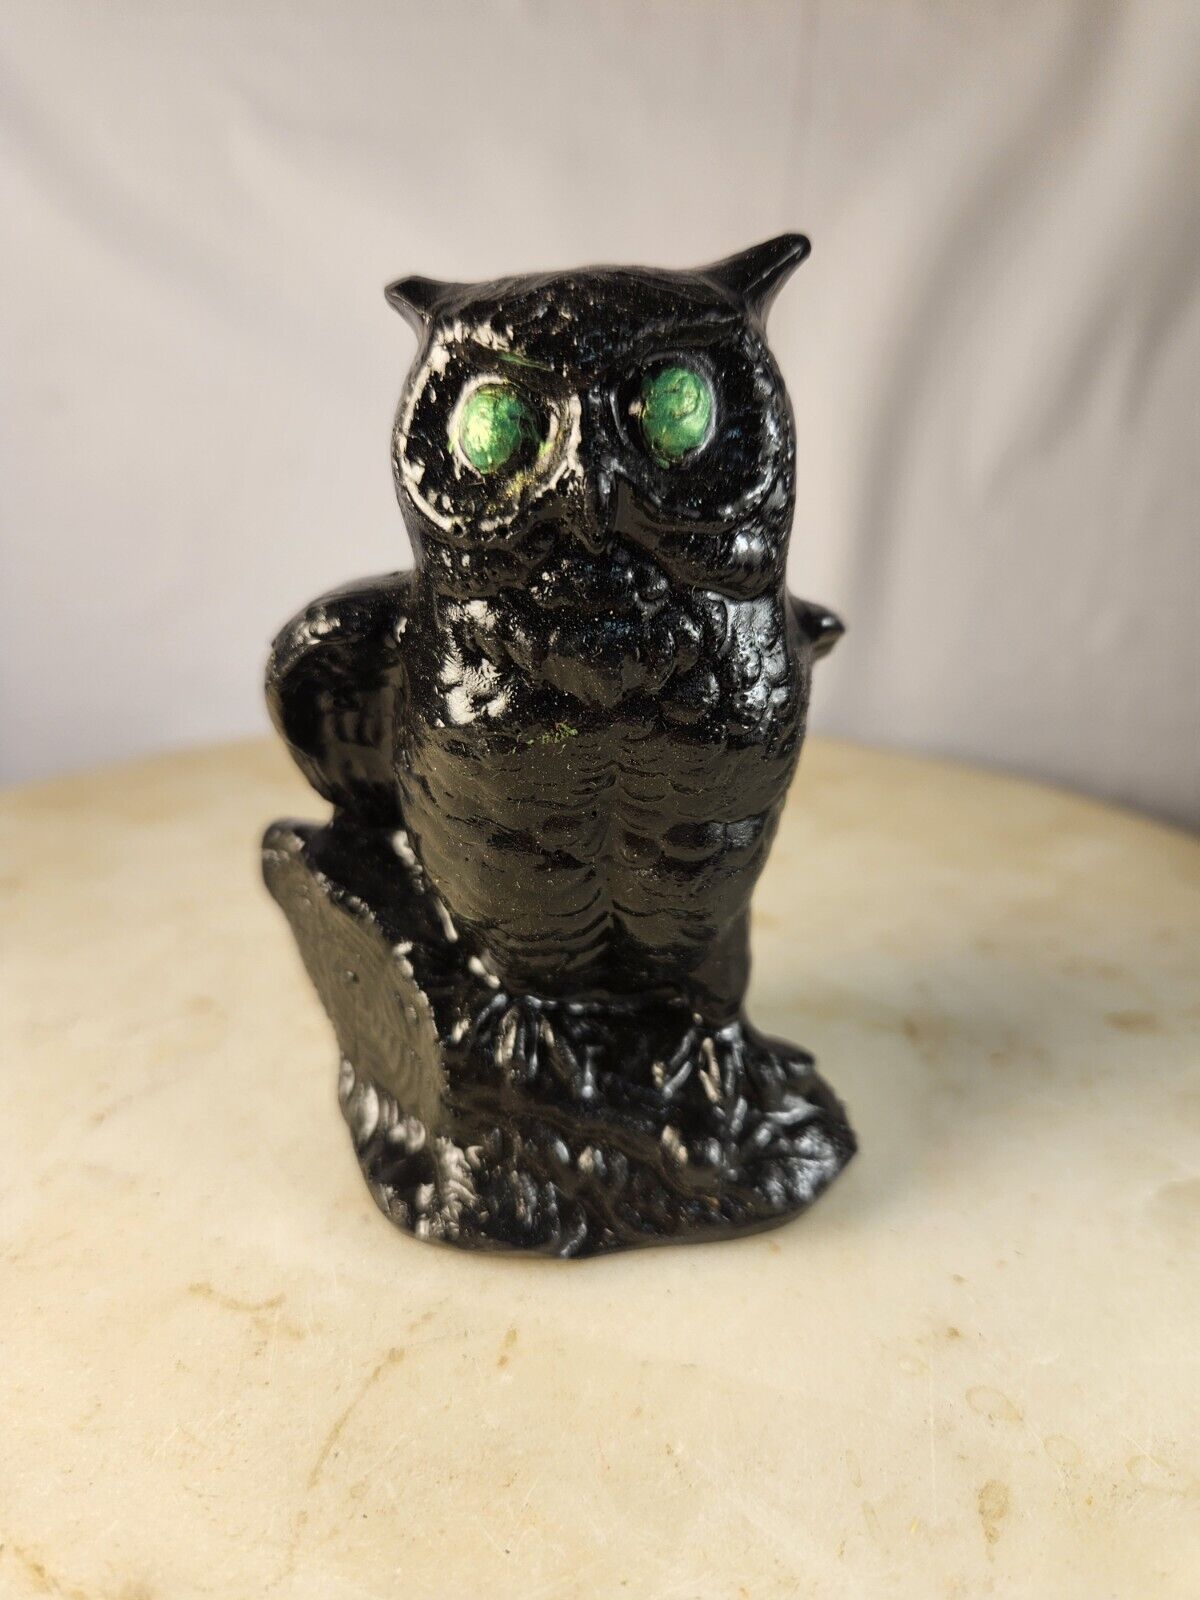 Vintage Owl Figurine Carving Made From Coal